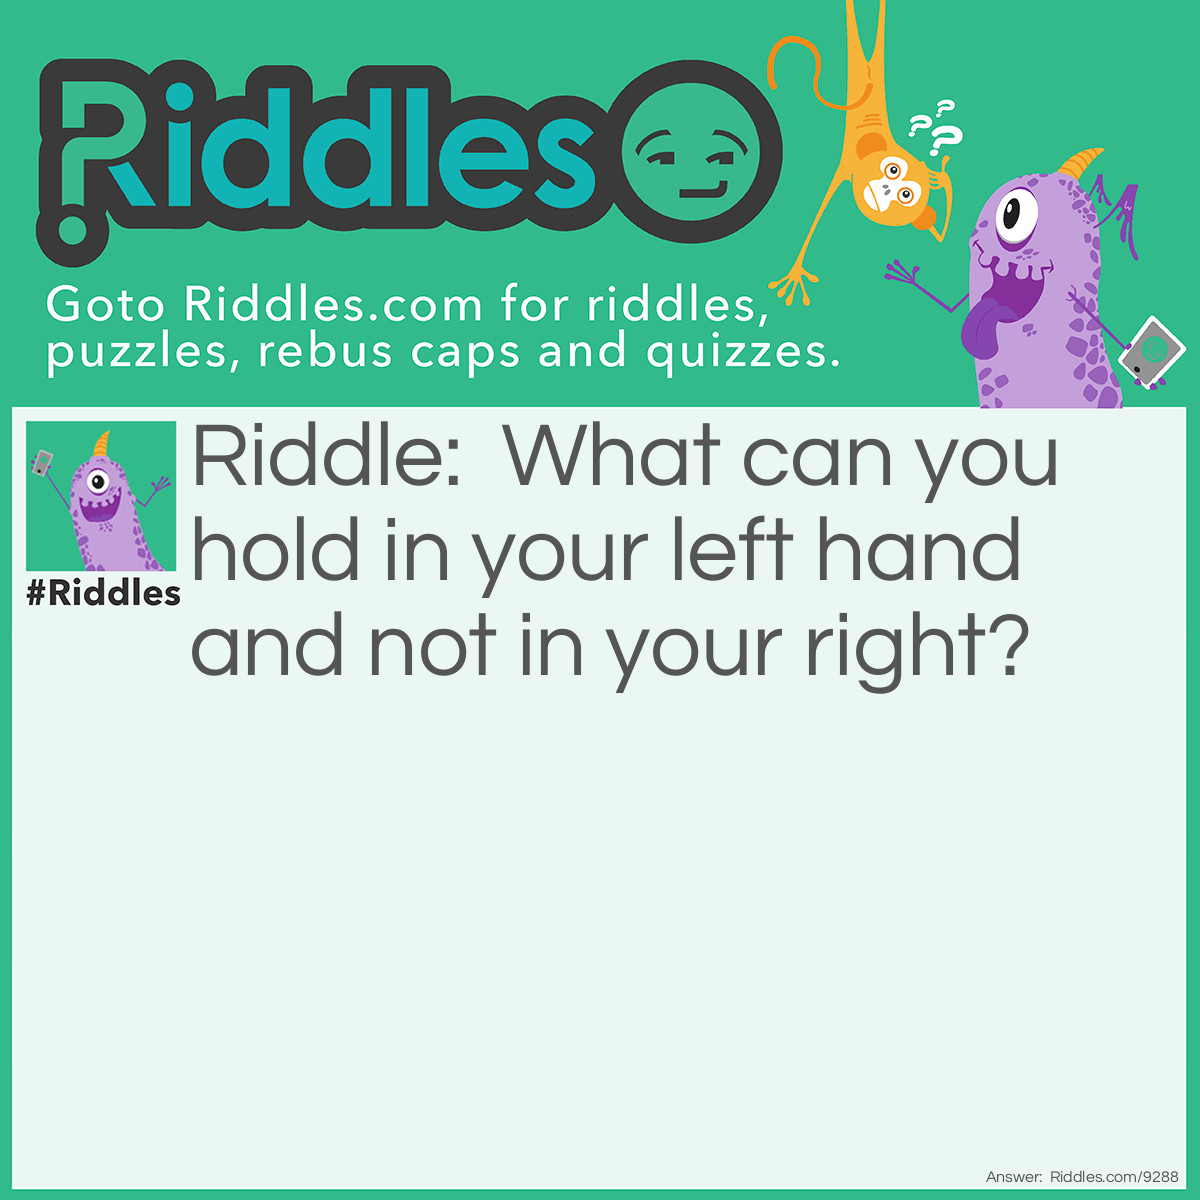 Riddle: What can you hold in your left hand and not in your right? Answer: Your right elbow.